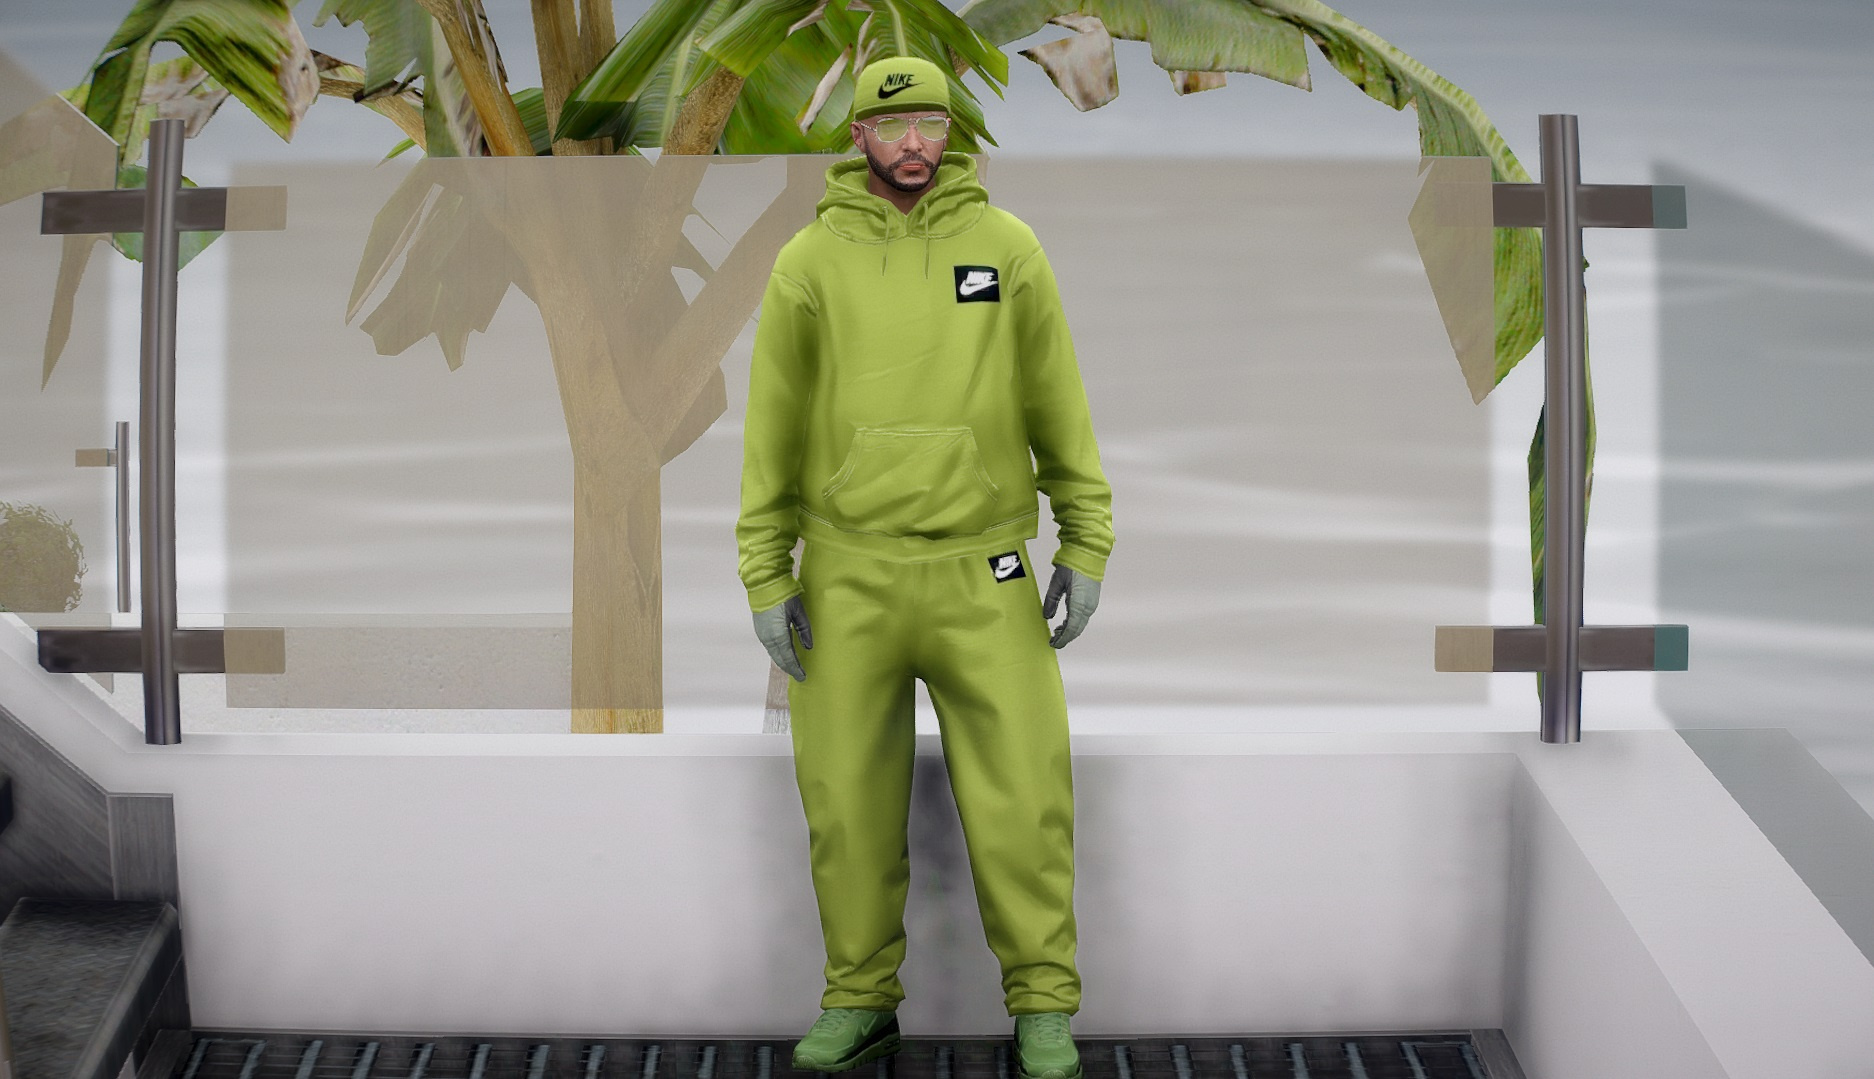 Green Nike Outfit | vlr.eng.br